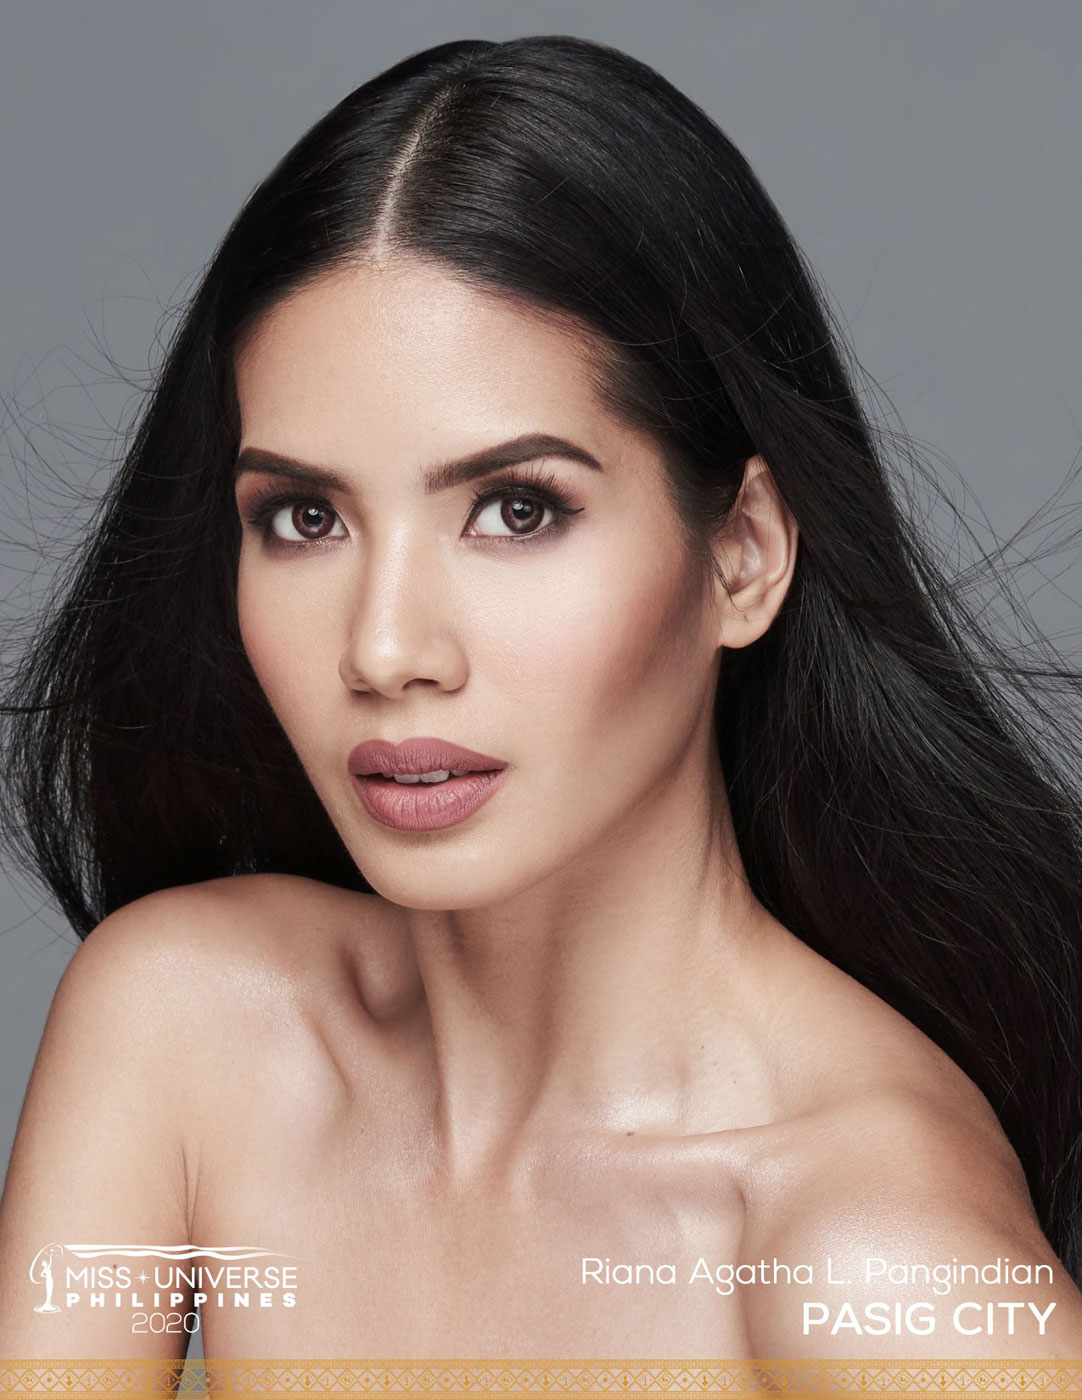 IN PHOTOS: The Miss Universe Philippines 2020 headshots